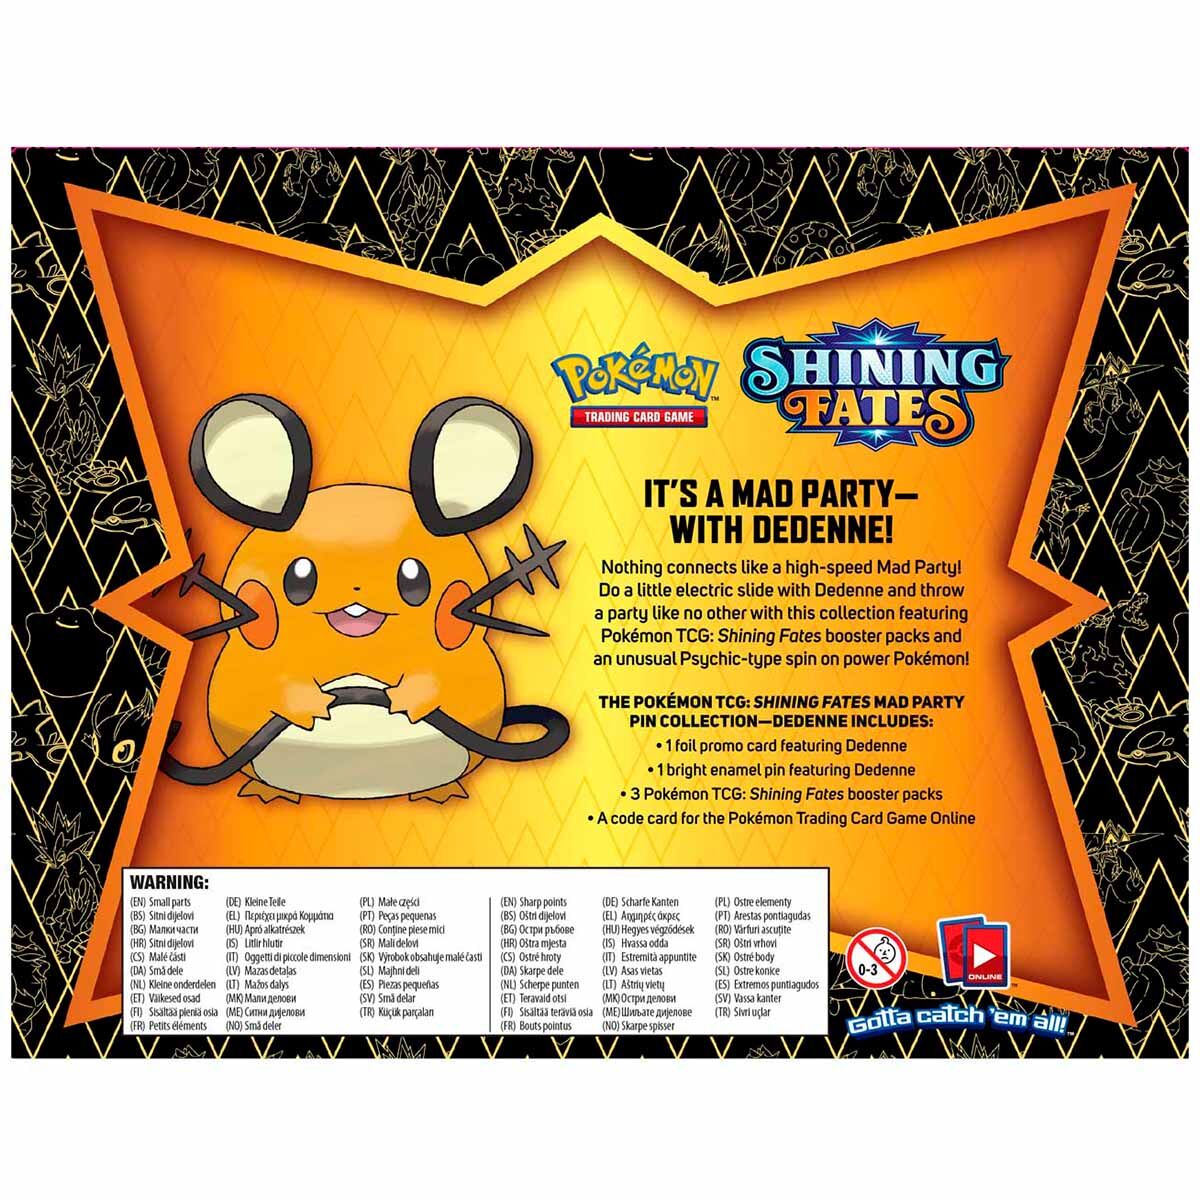 Pokémon Shining Fates Mad Party Pin Collection Dedenne